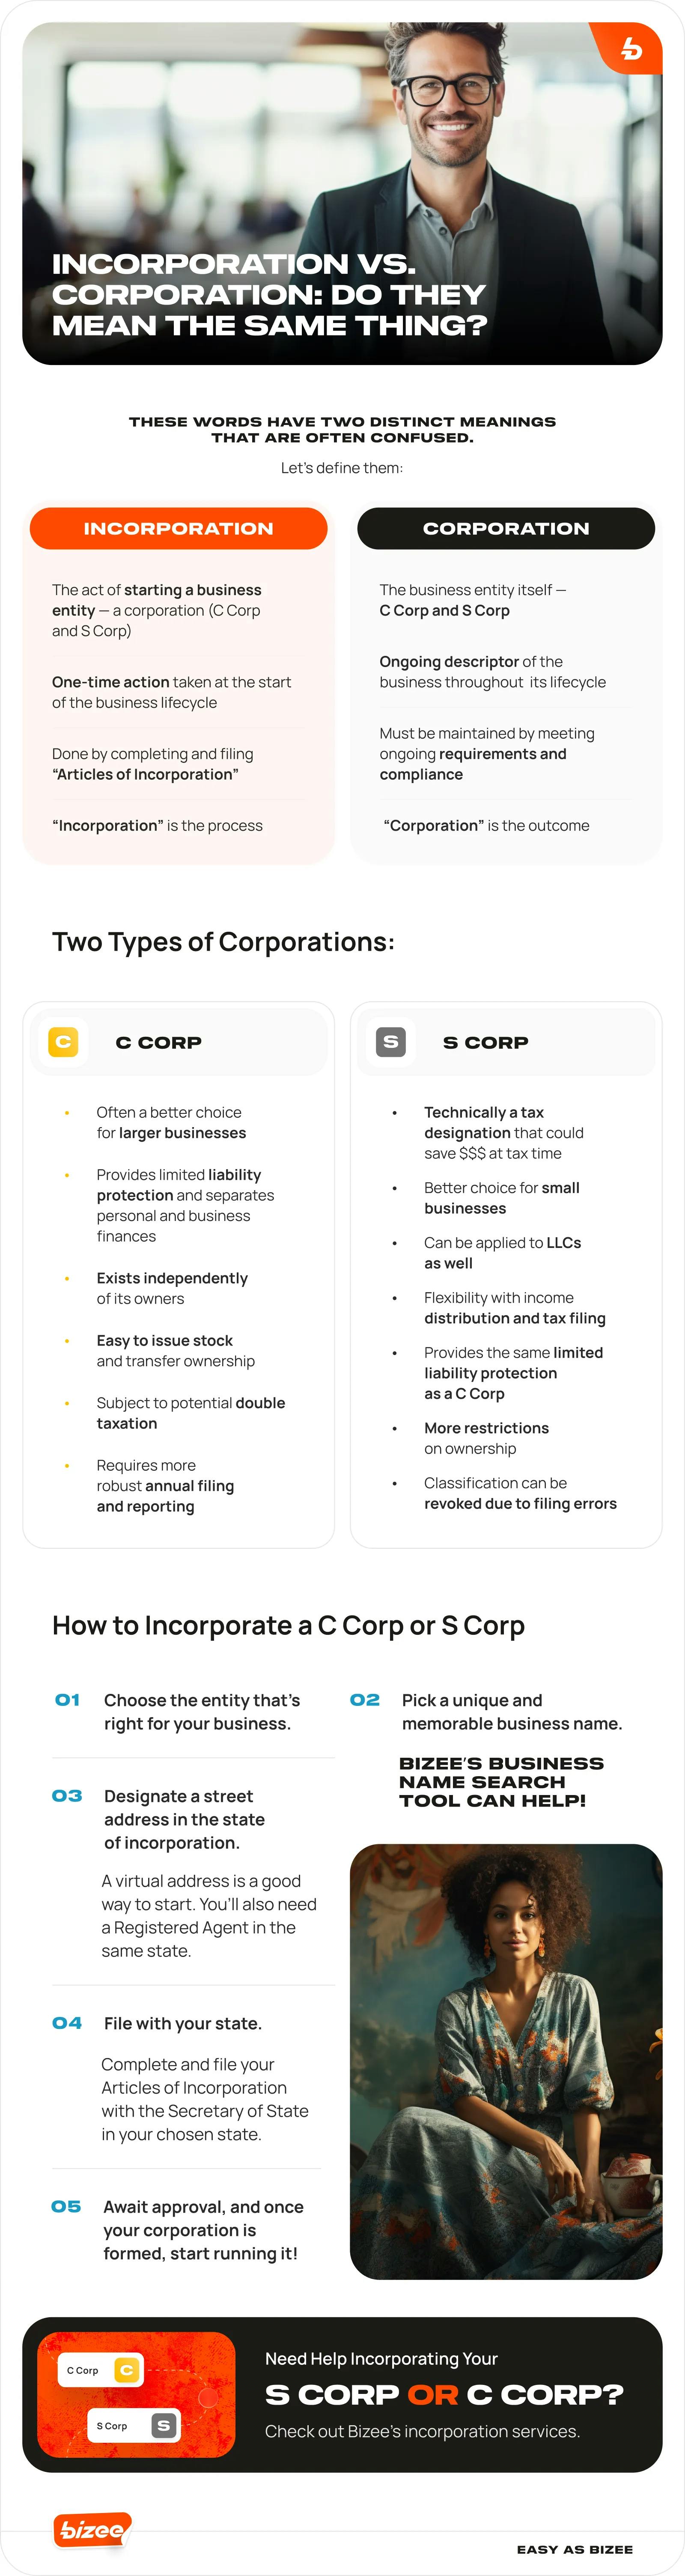 Incorporation vs corporation Do They Mean the Same Thing